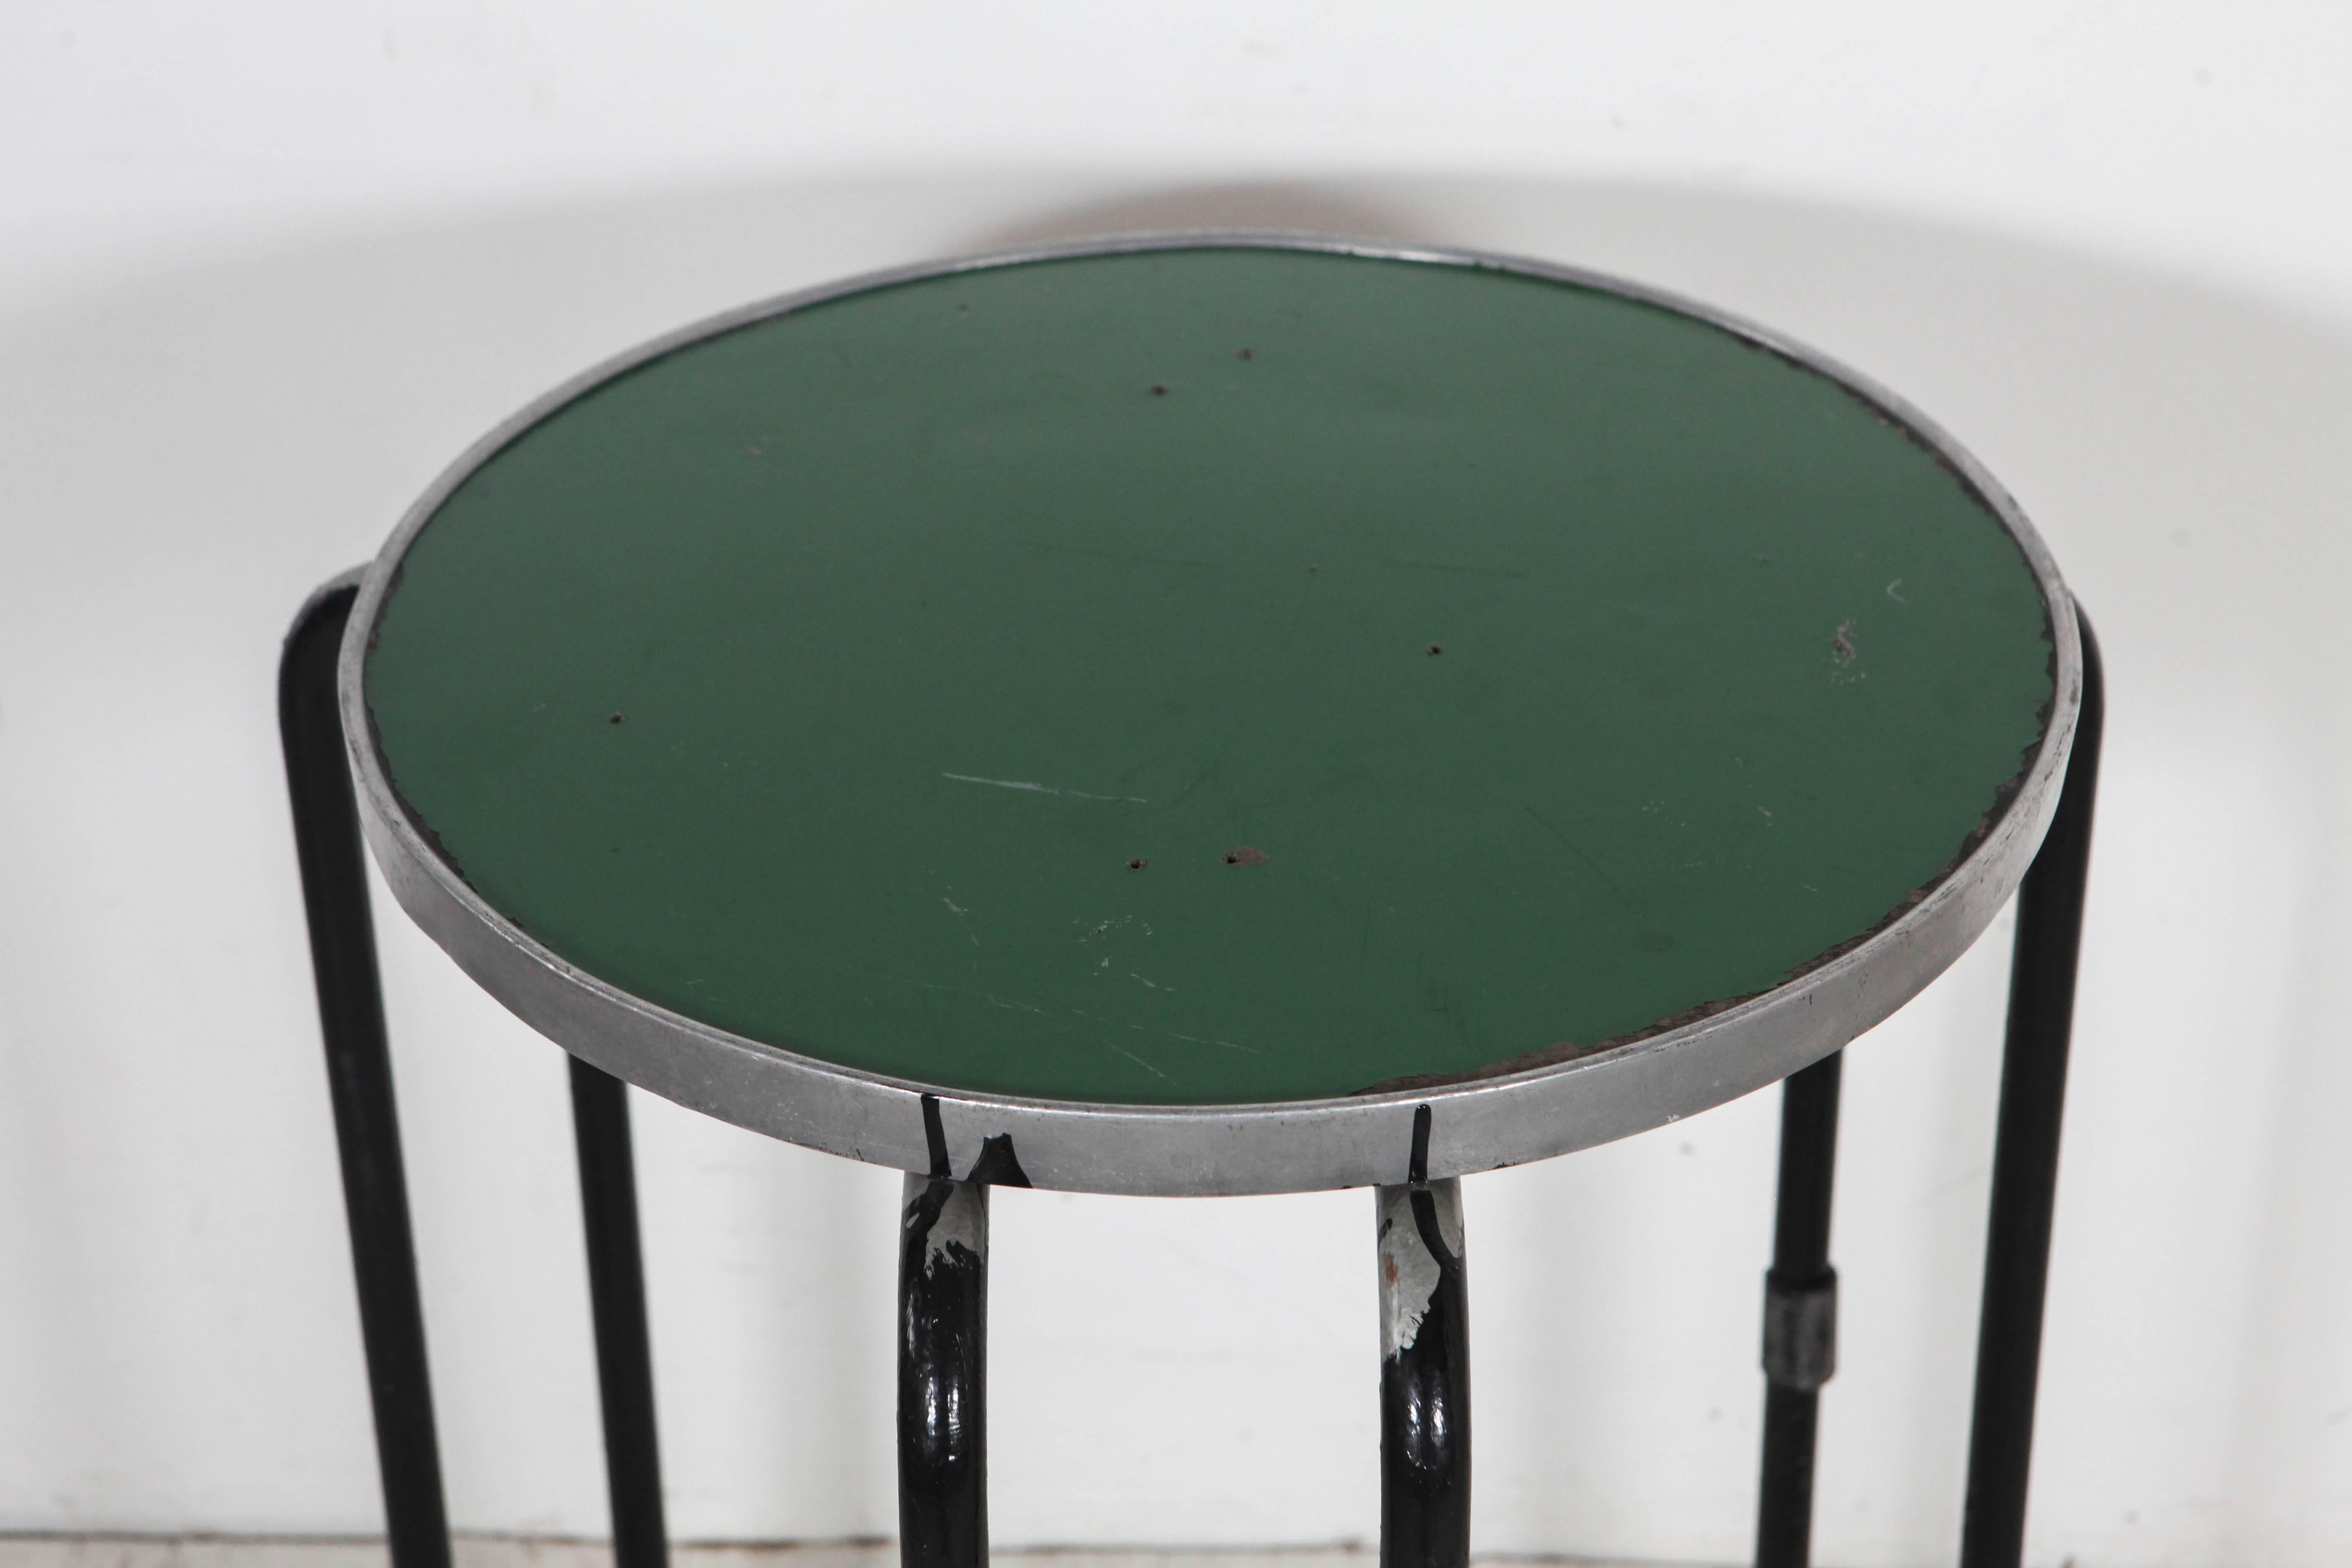 Tall green round side table with excellent black legs.